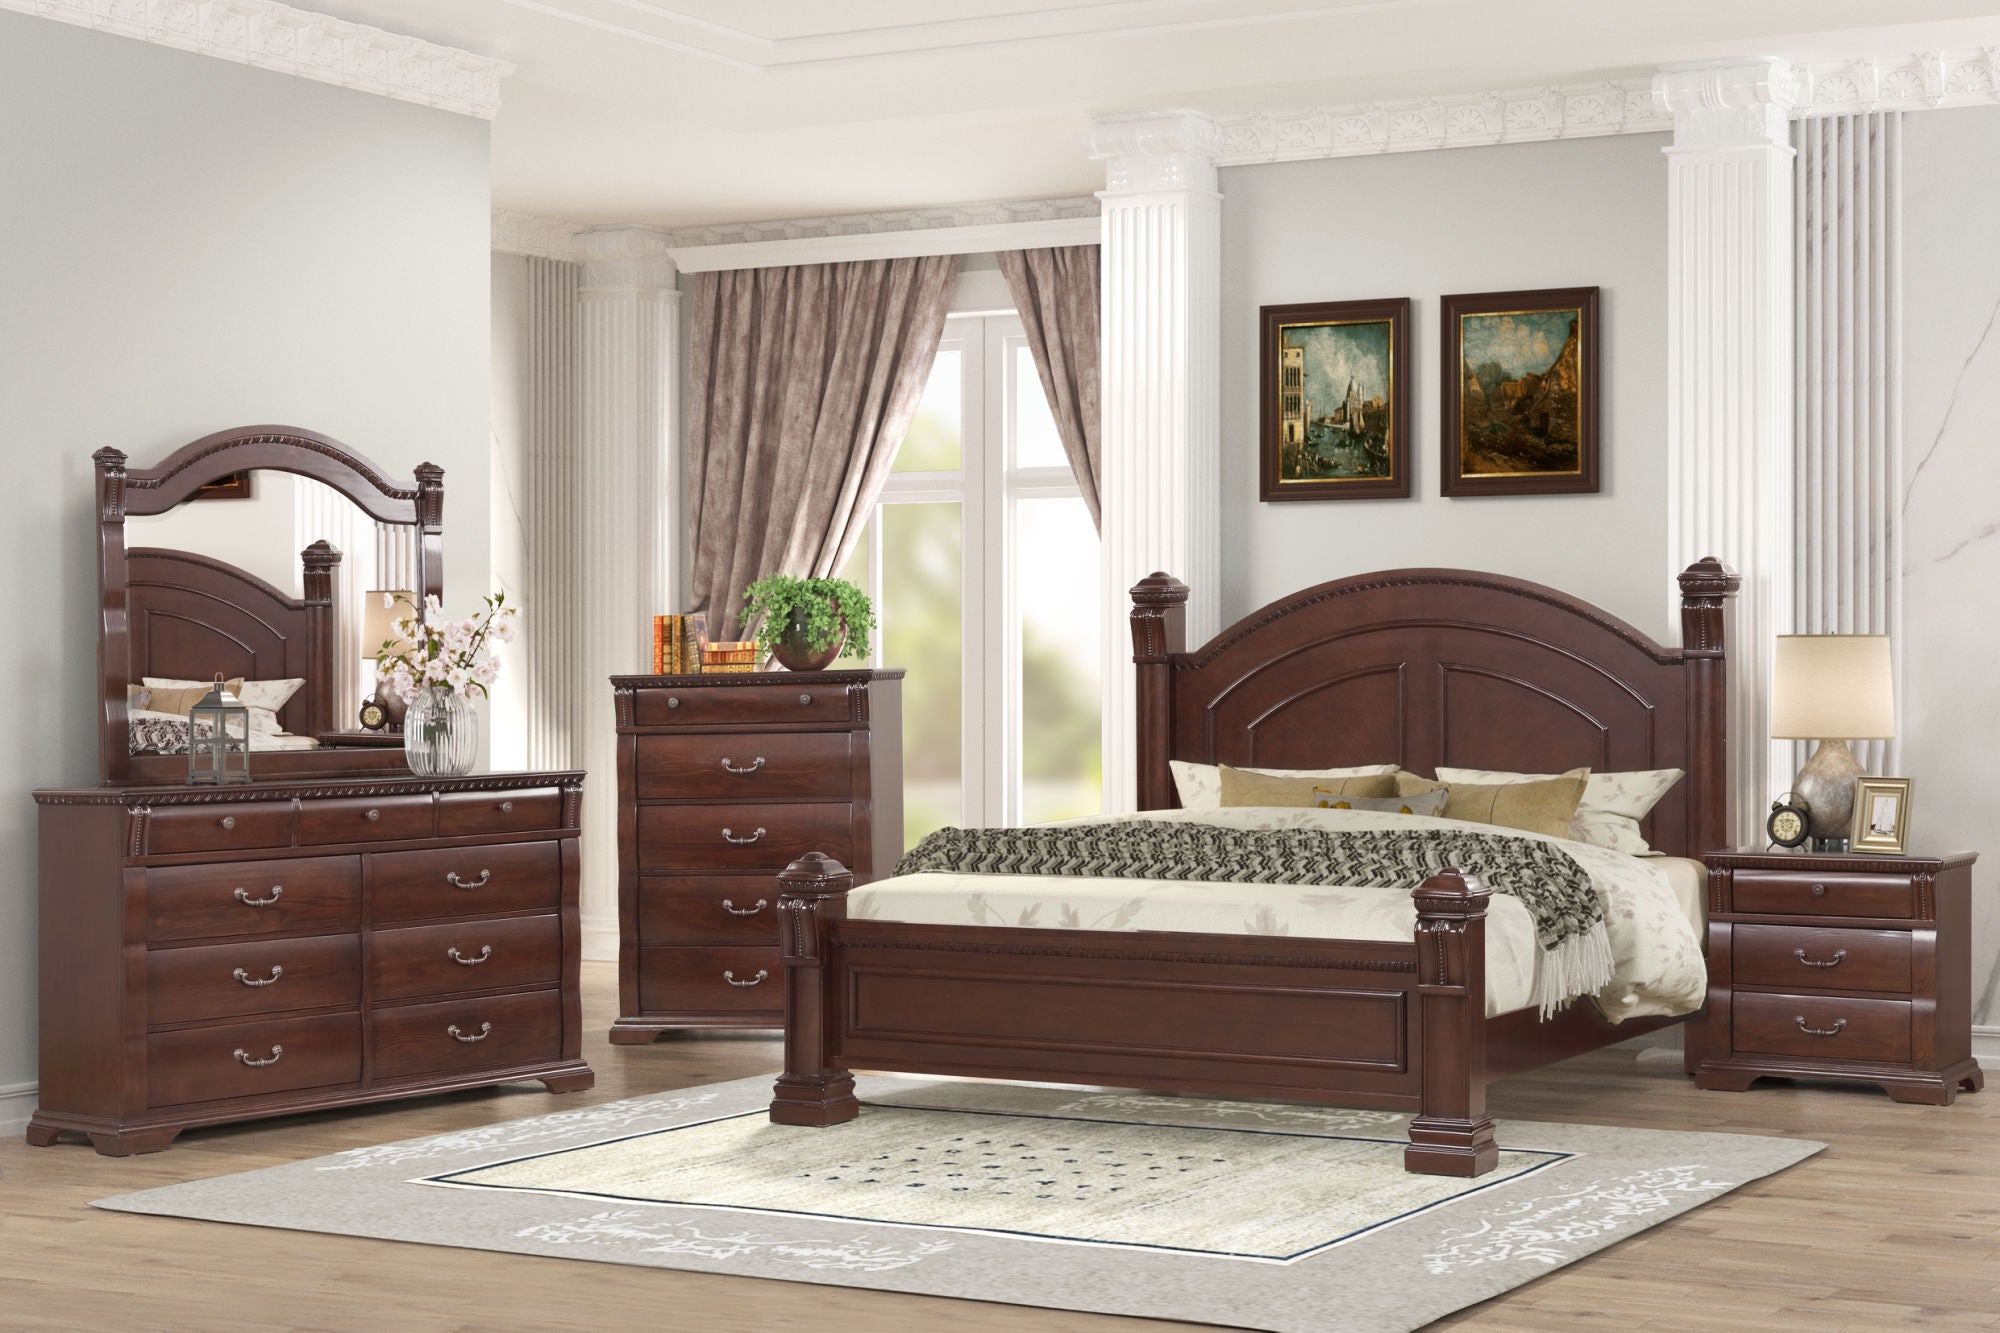 Aspen Queen 4 Pc Traditional Bedroom set made with Wood in Cherry